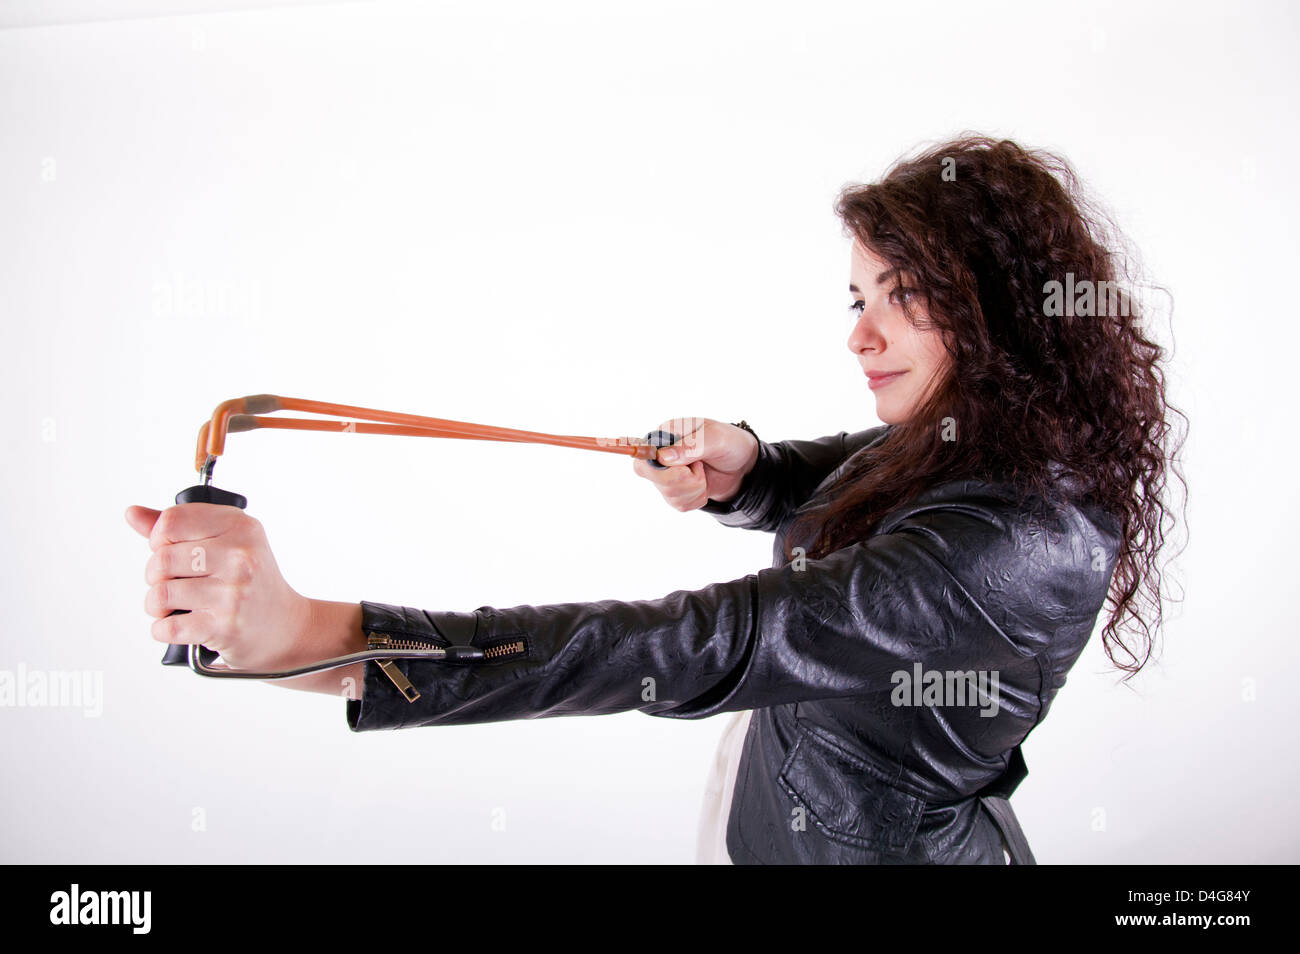 brunette young girl holding a slingshot aiming on the left side Stock Photo